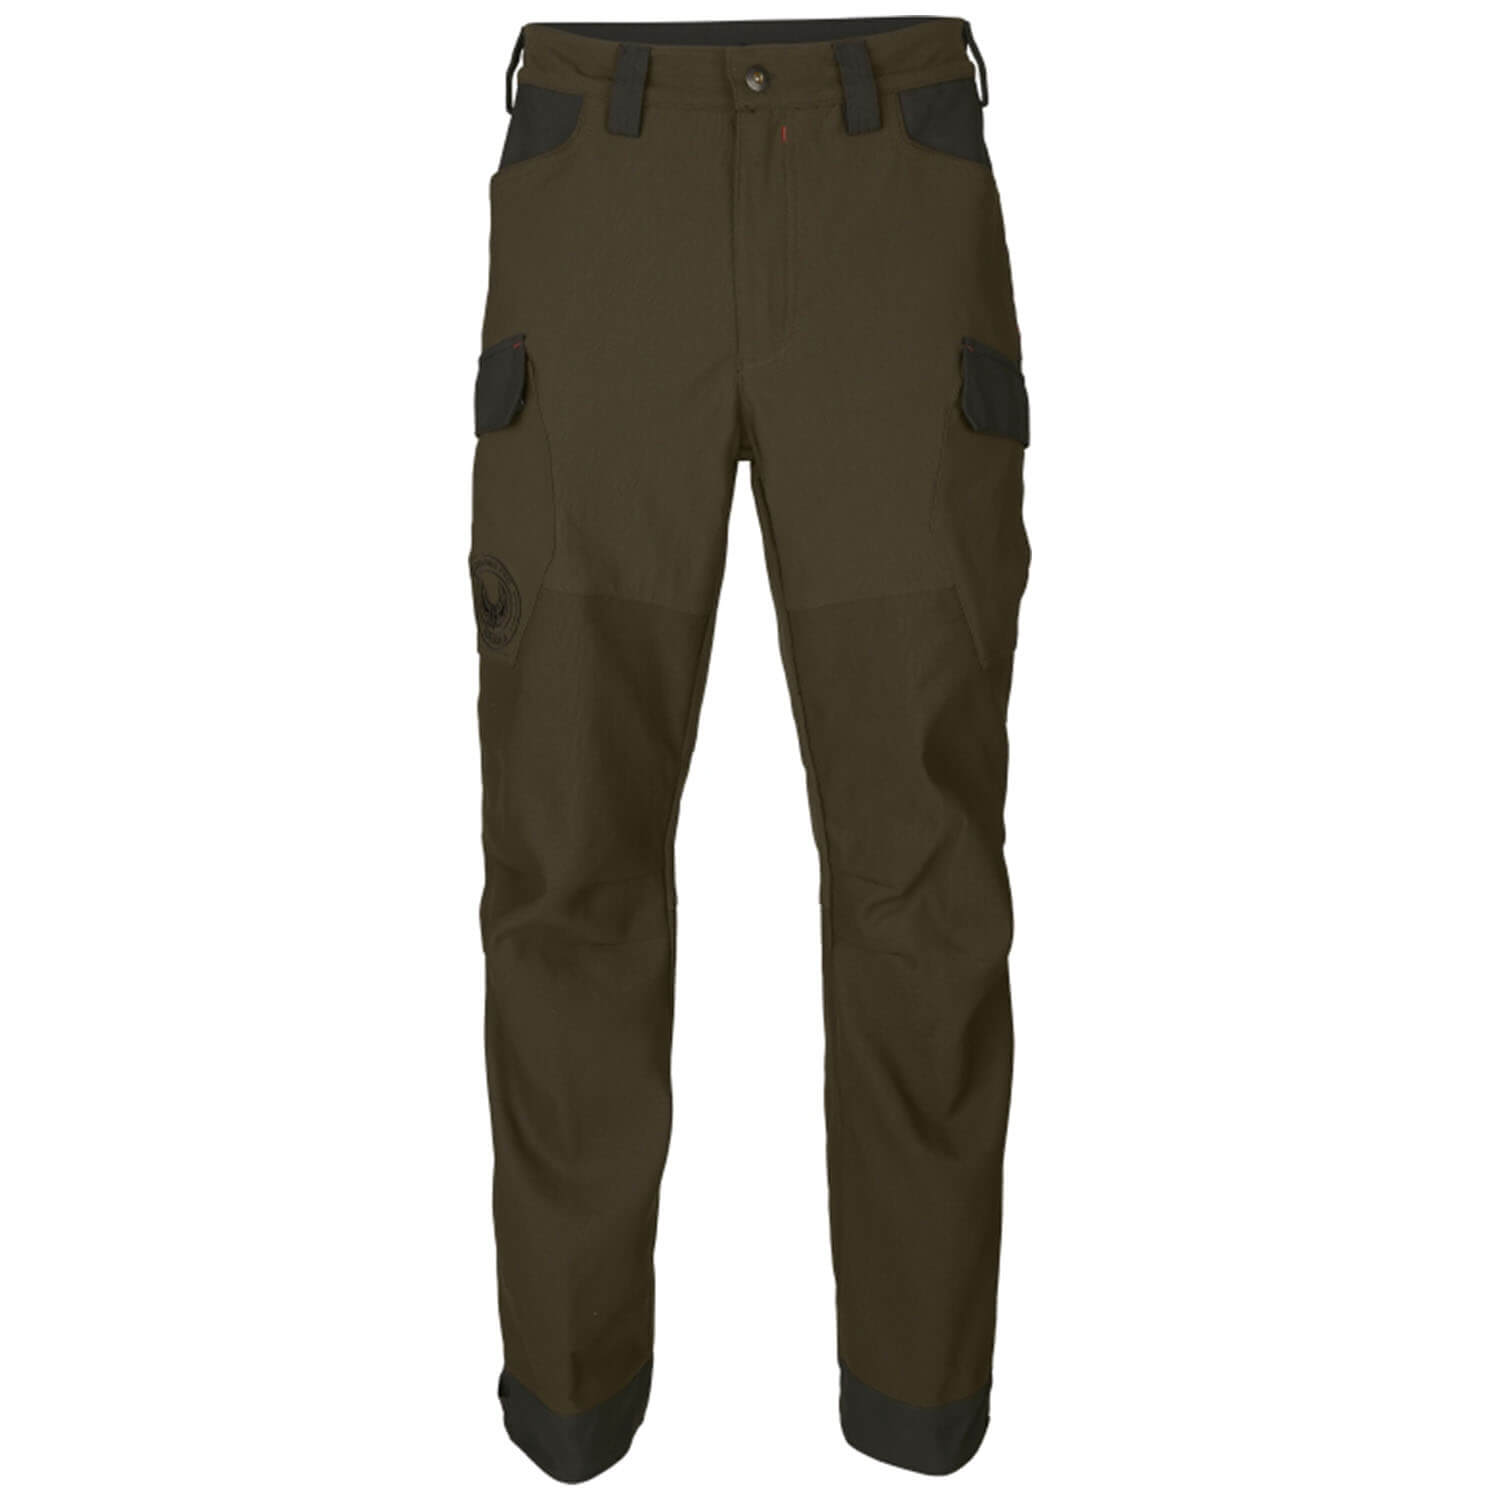 Härkila hunting trousers Wildboar Pro Move (willow green) - Driven Hunt